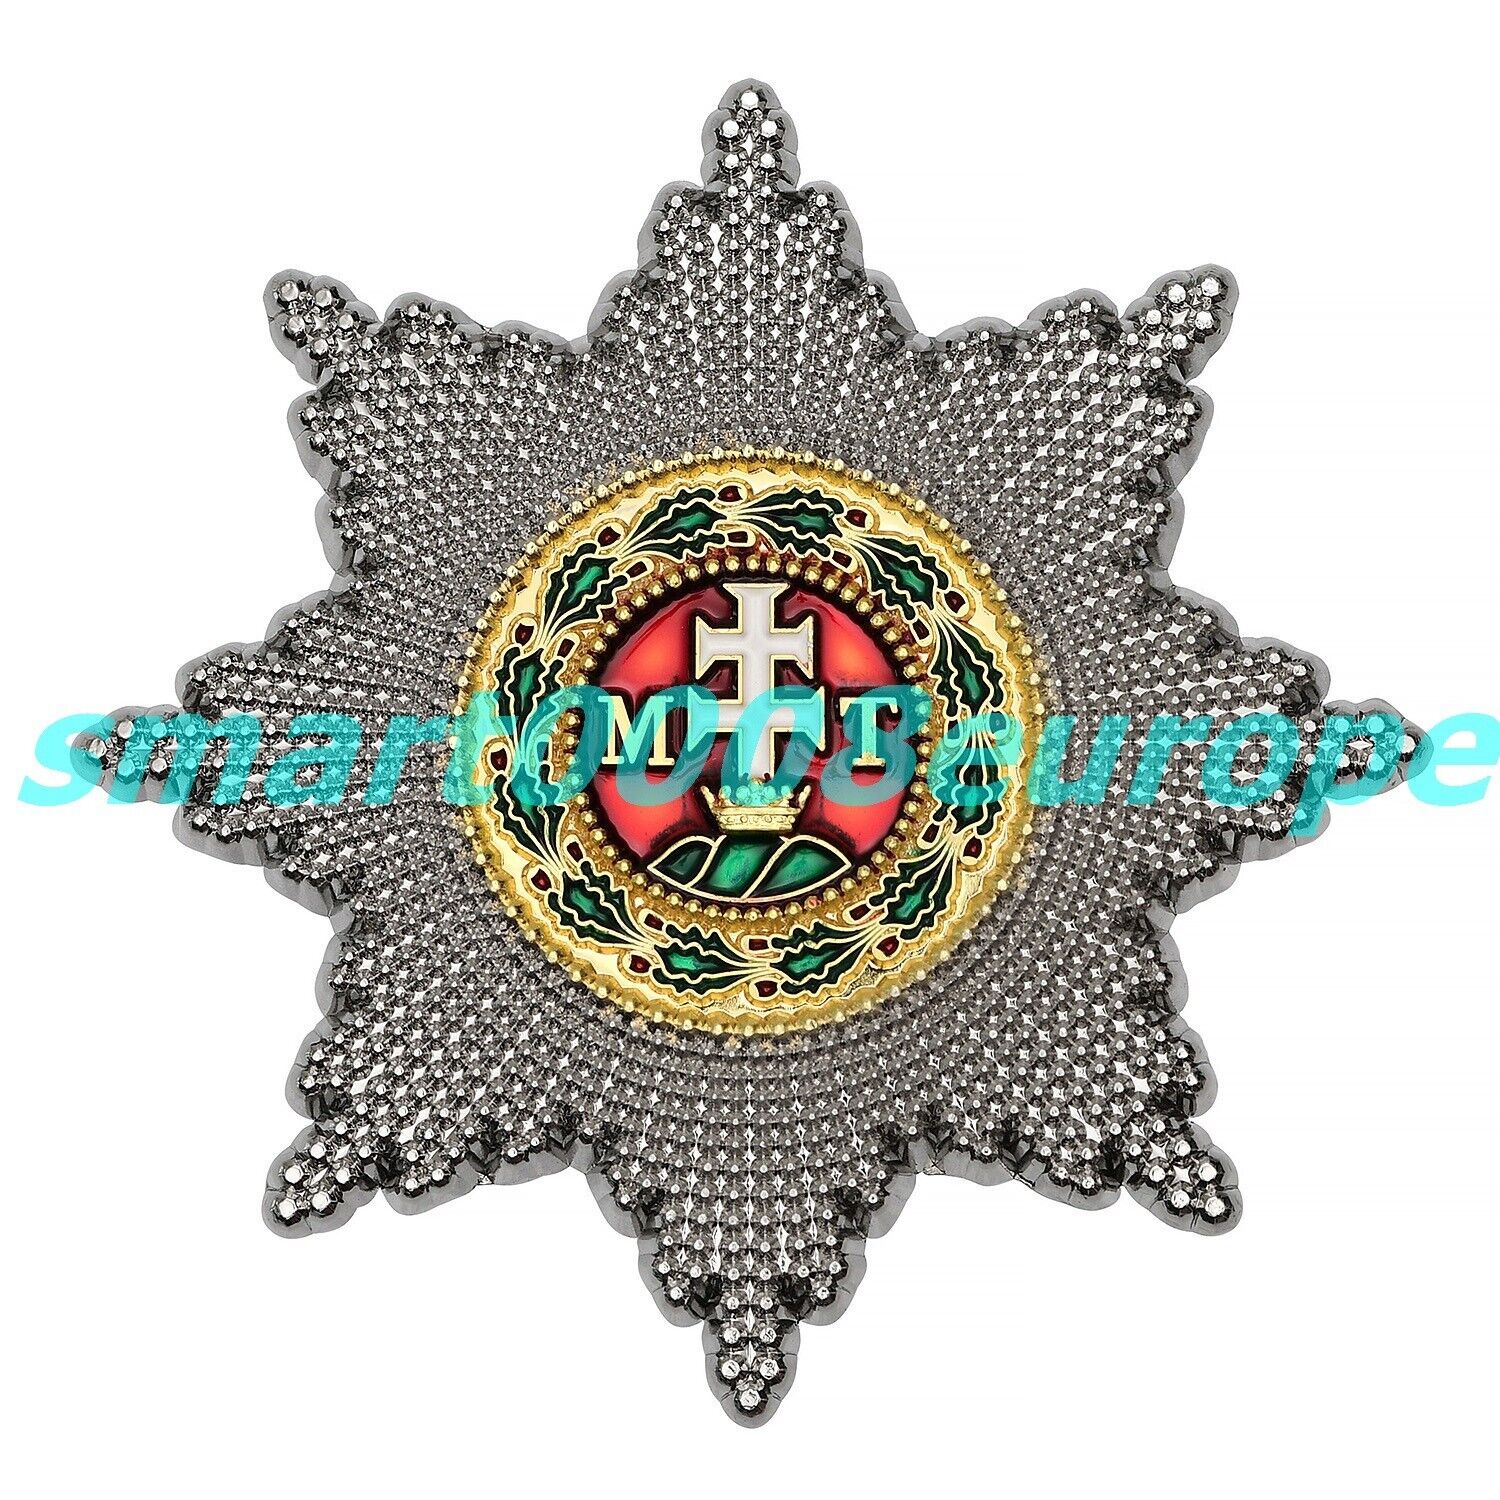 Star of the Order of St. Stephen. Hungary. Repro